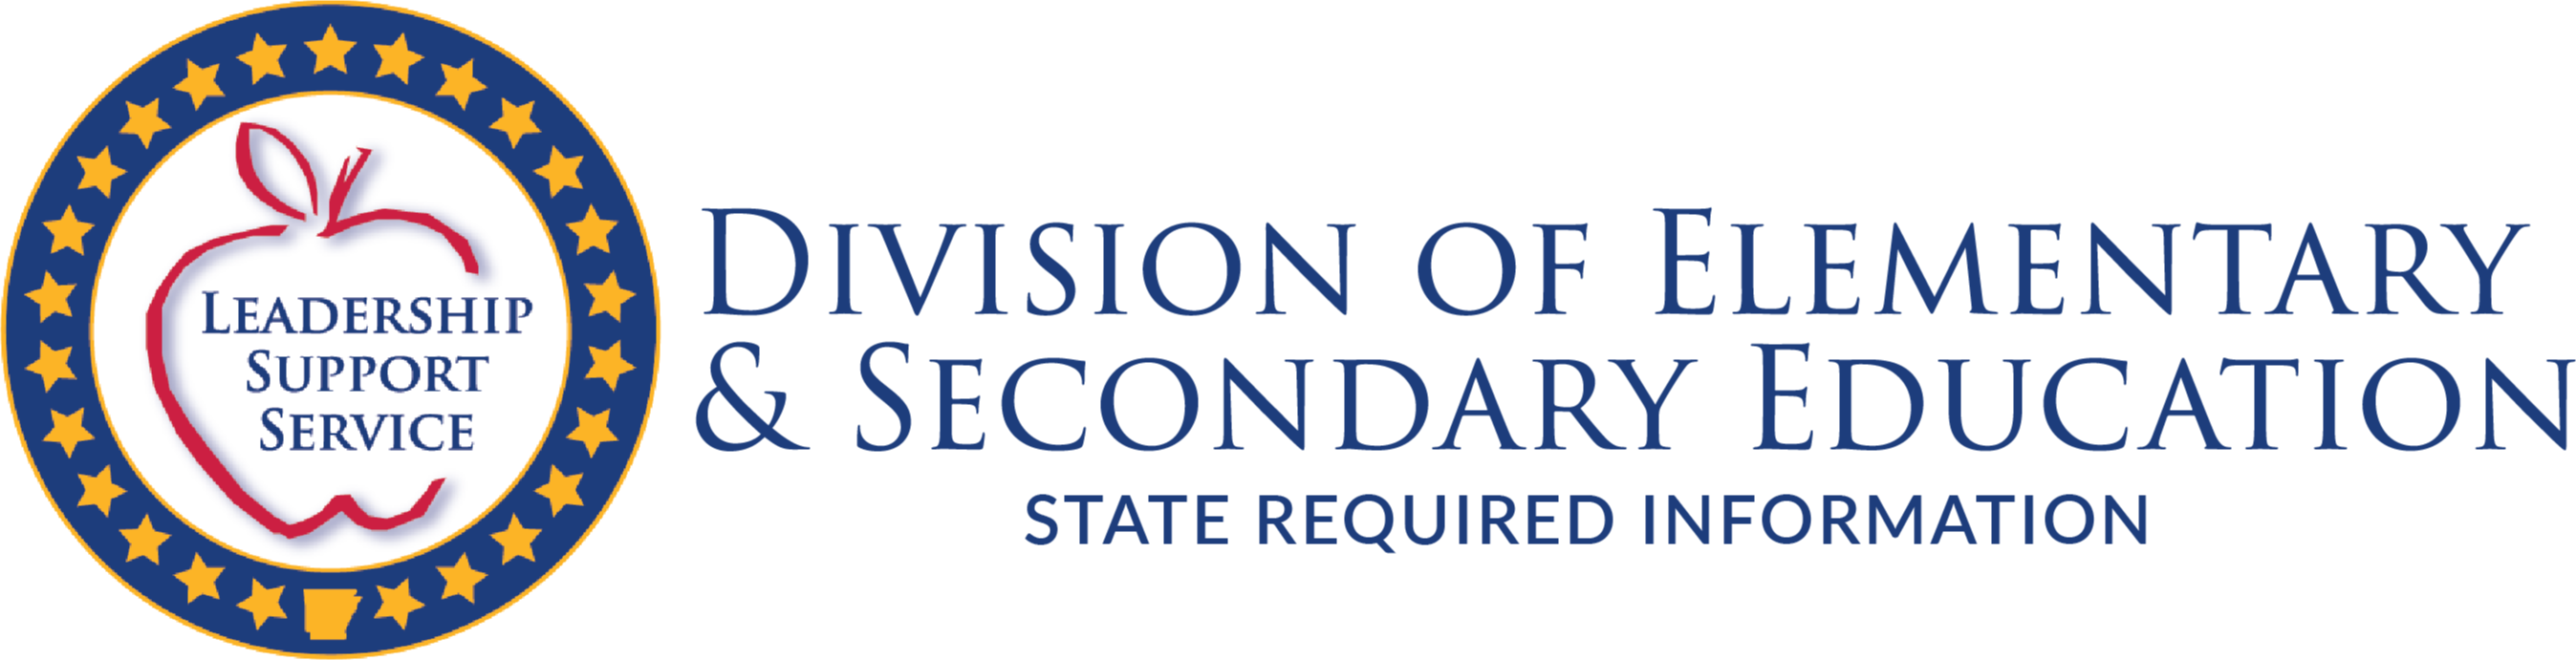 Division of Elementary & Secondary Education State Required Information